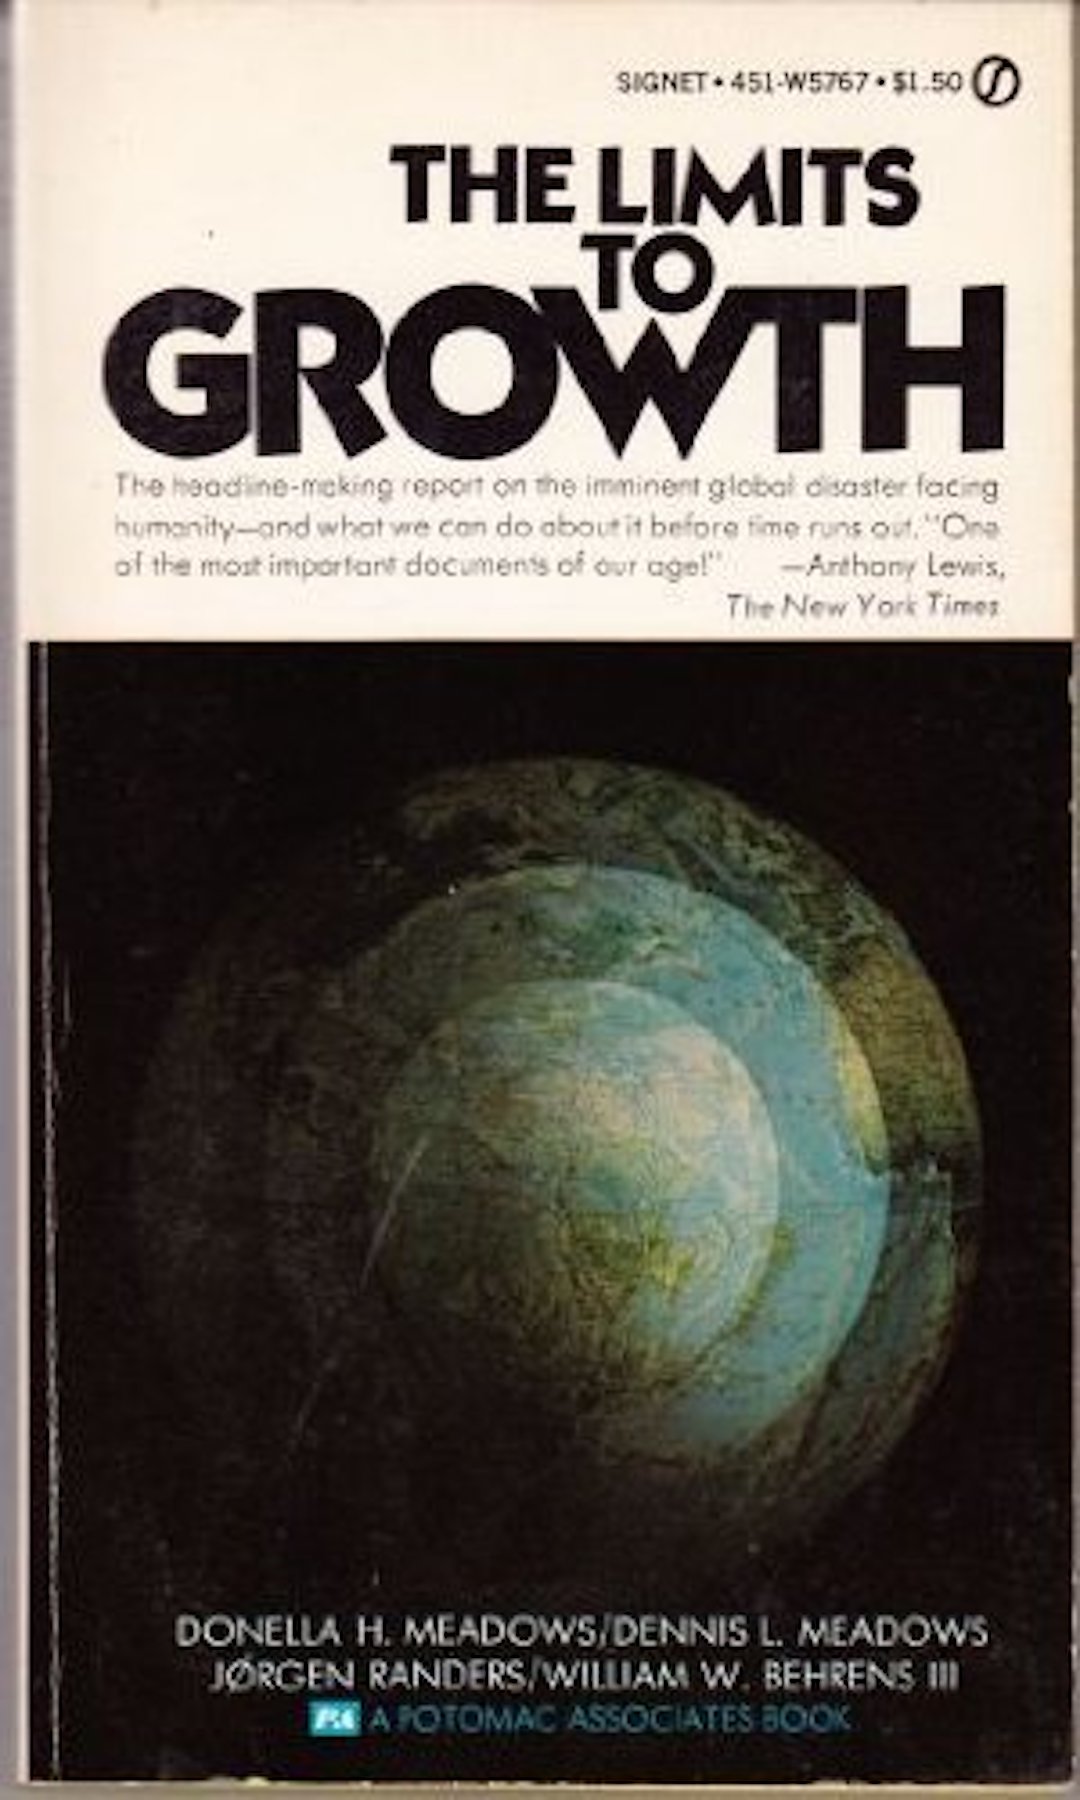 Limits to Growth - report to the Club of Rome [book cover] 1972 (3)